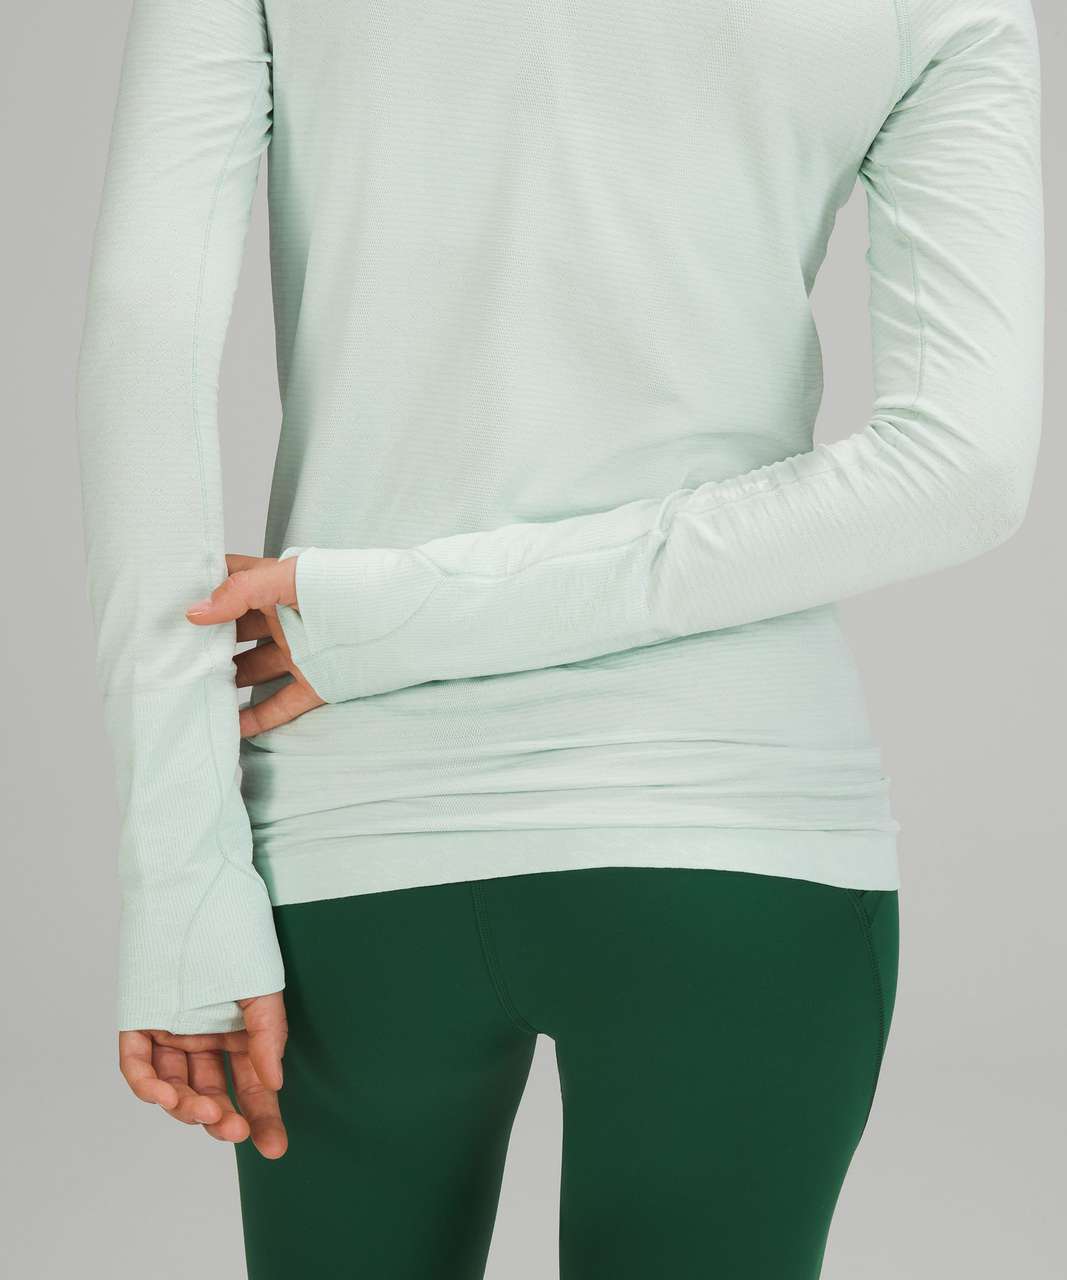 Lululemon Swiftly Tech Long Sleeve Shirt 2.0 - Distorted Static Delicate Mint / White